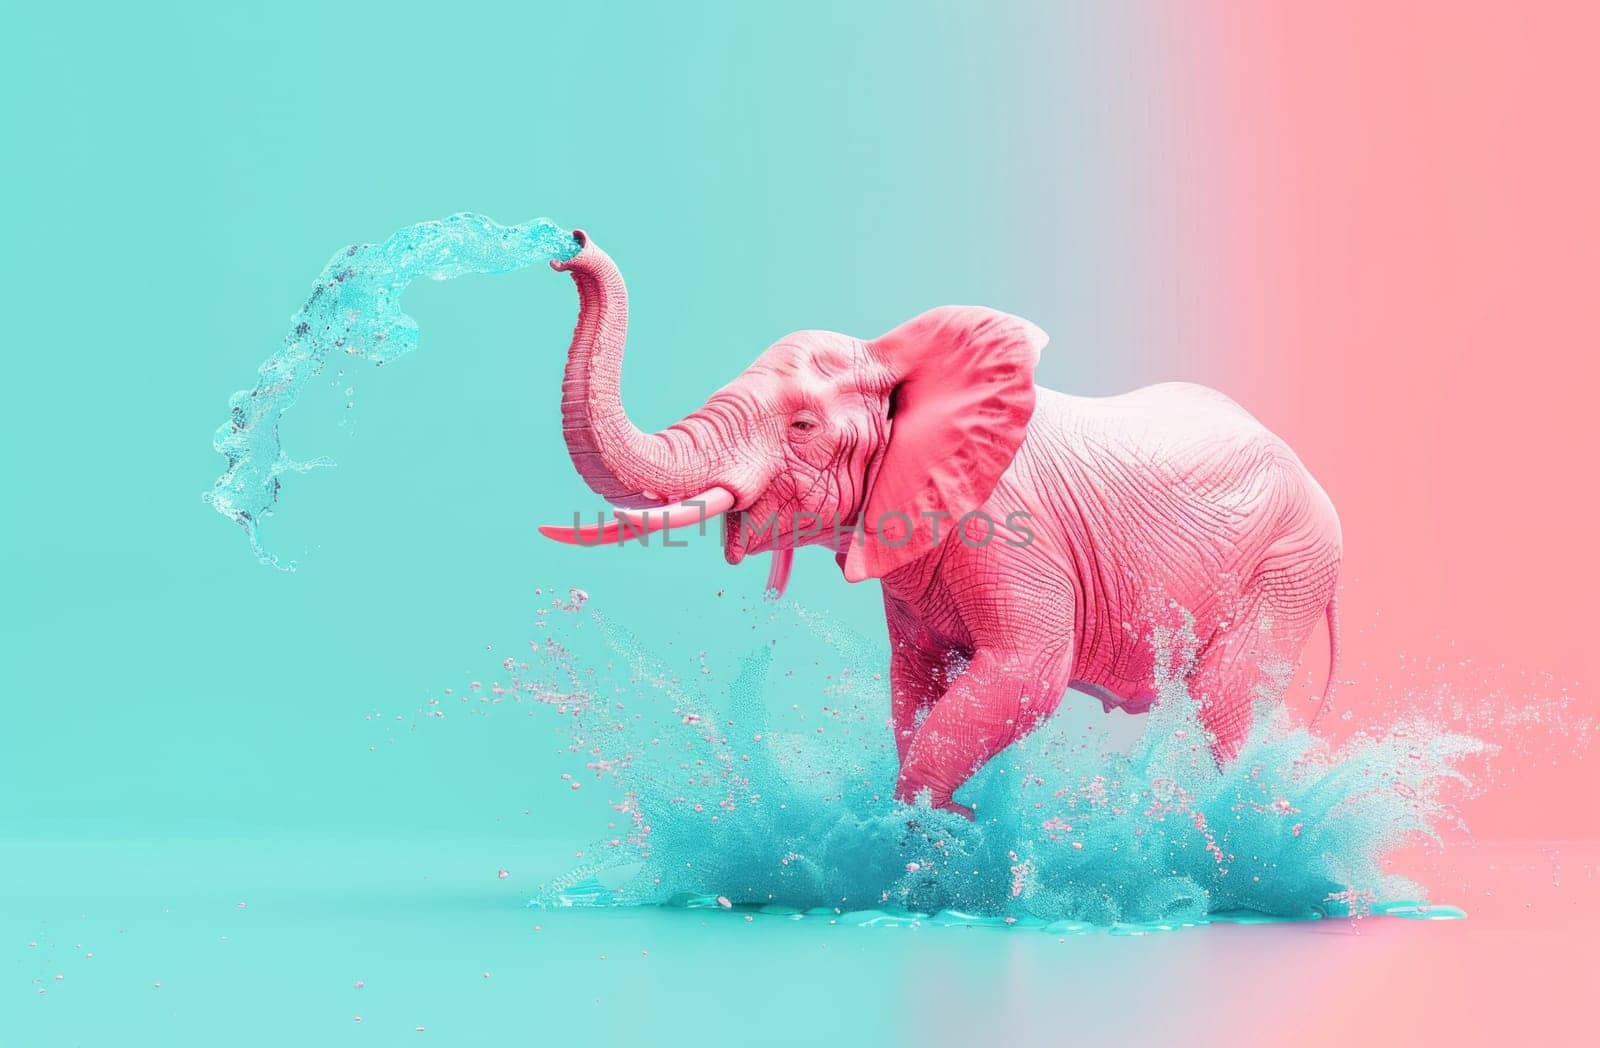 Pink elephant splashing water in a colorful background with splashes of blue and pink